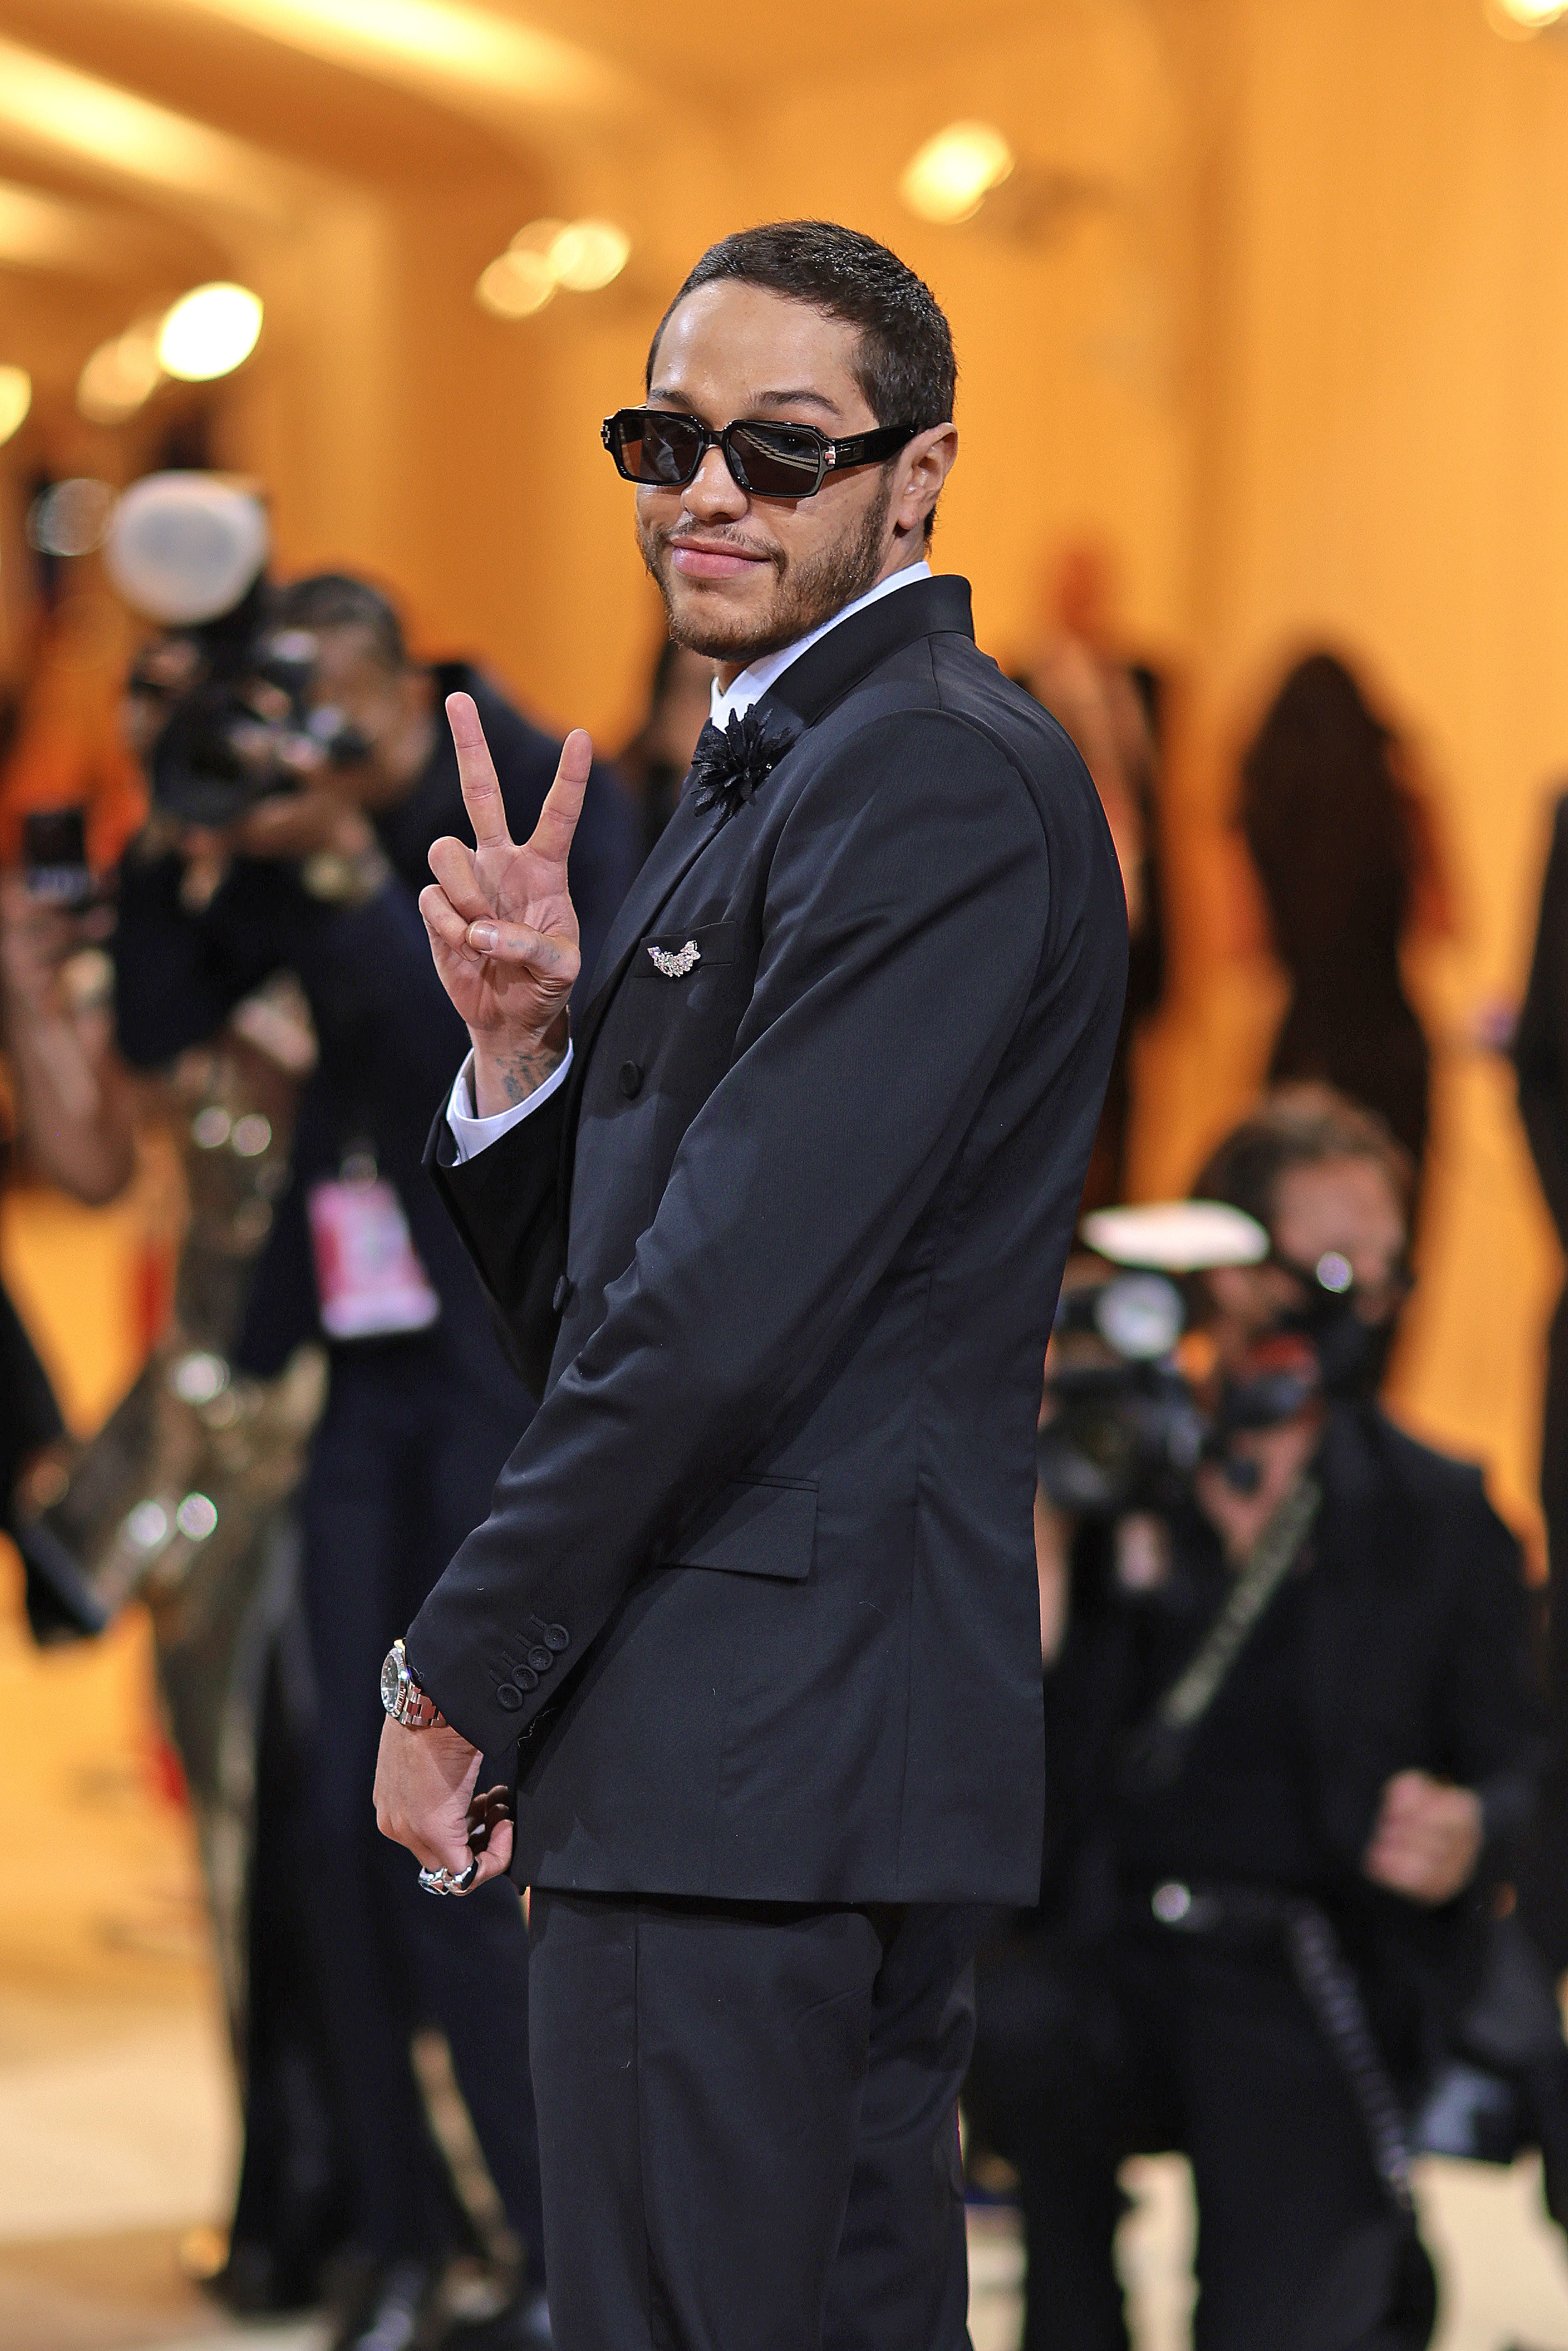 Pete in a suit at the MET Gala giving the peace sign